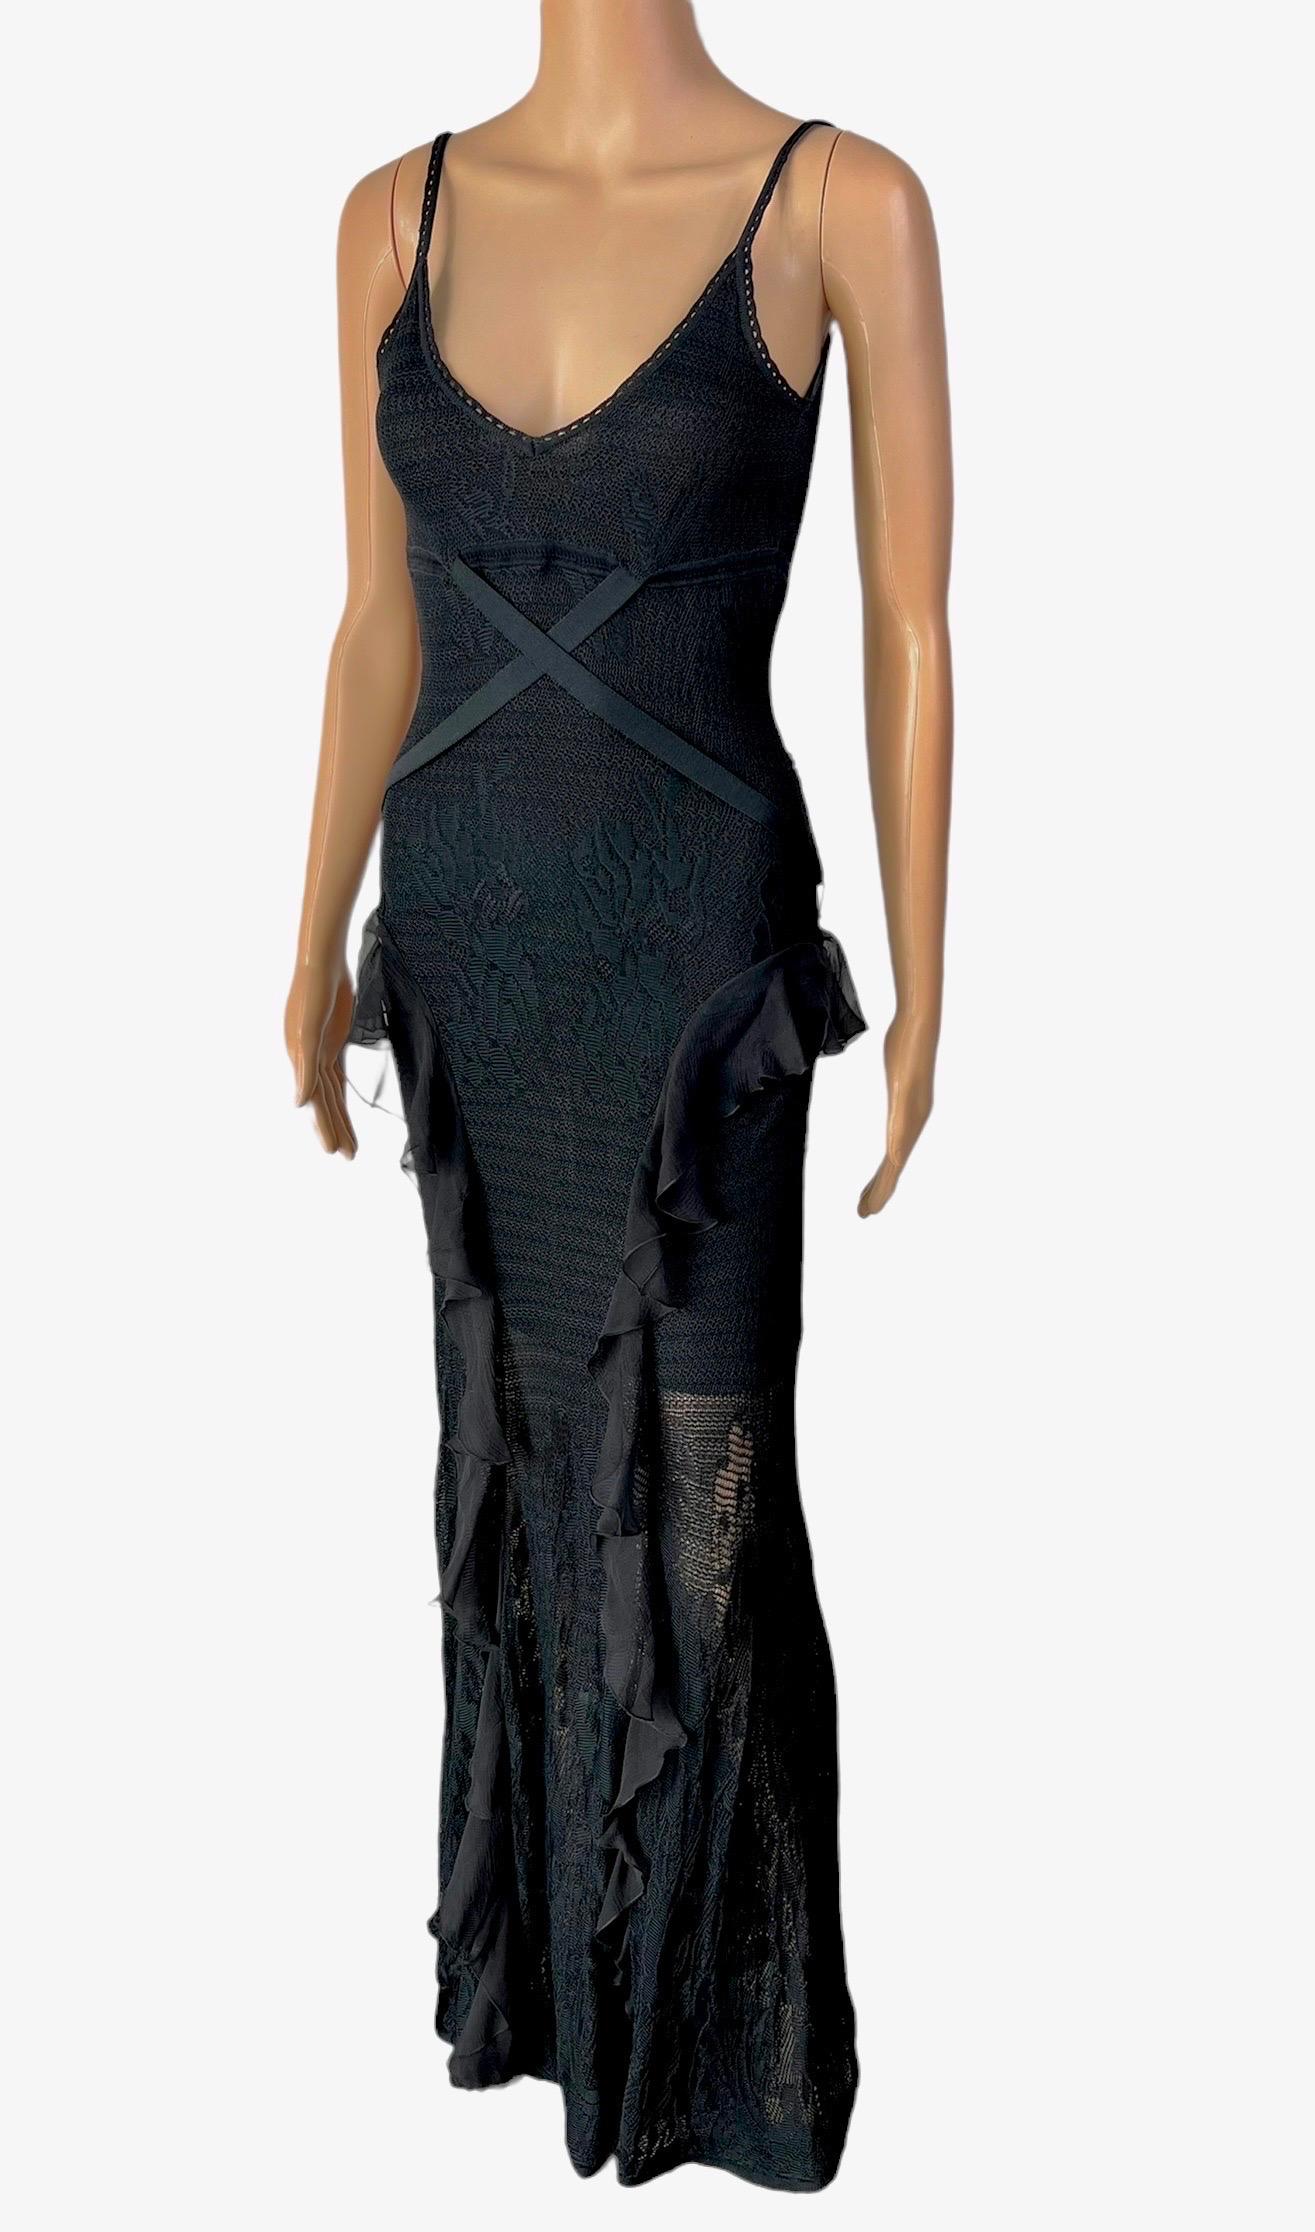 Christian Dior by John Galliano S/S2003 Sheer Lace Knit Black Evening Dress Gown For Sale 5